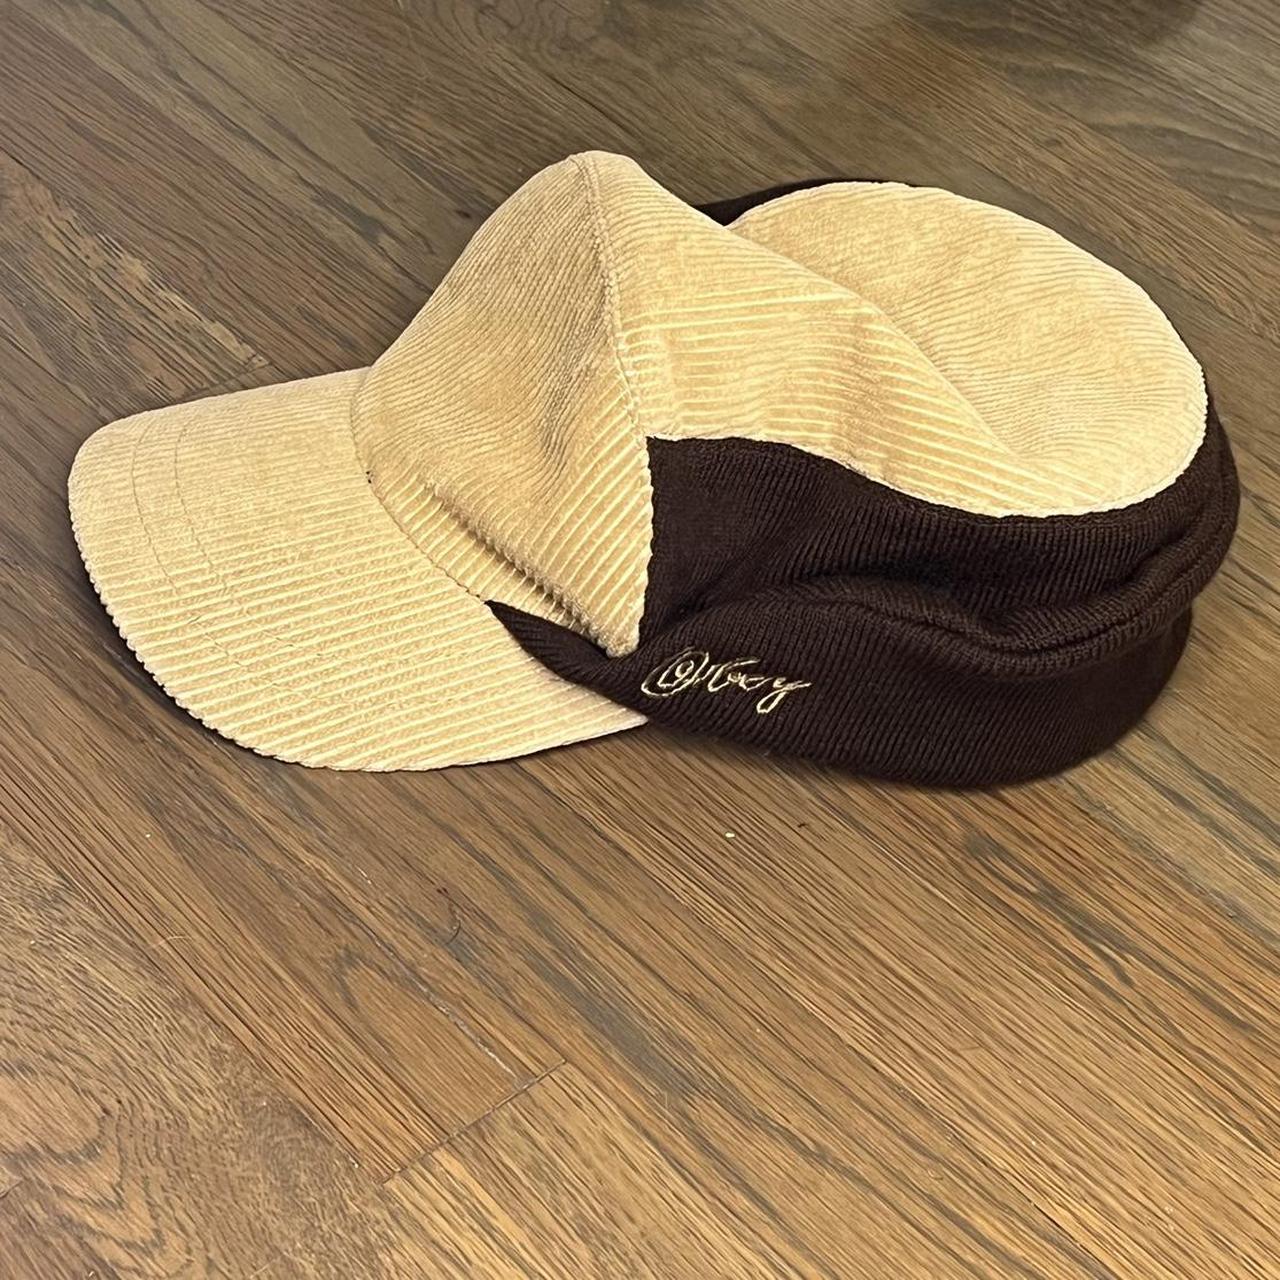 Obey Men's Brown and Tan Hat (4)